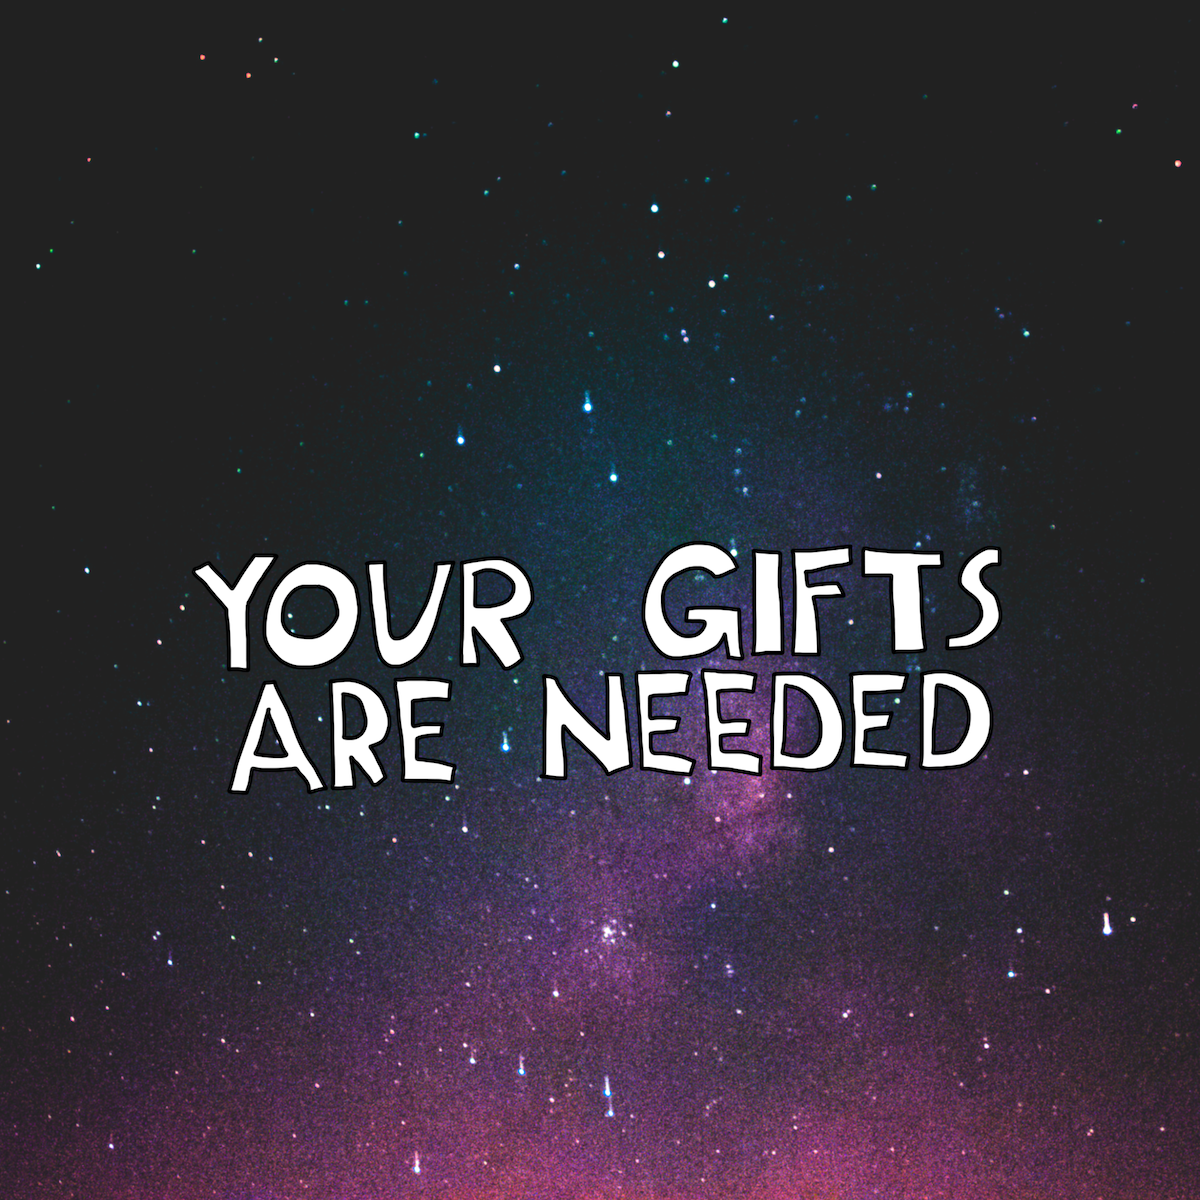 Your gifts are needed (Monthly calls on Marketing as a Creative + Spiritual practice)